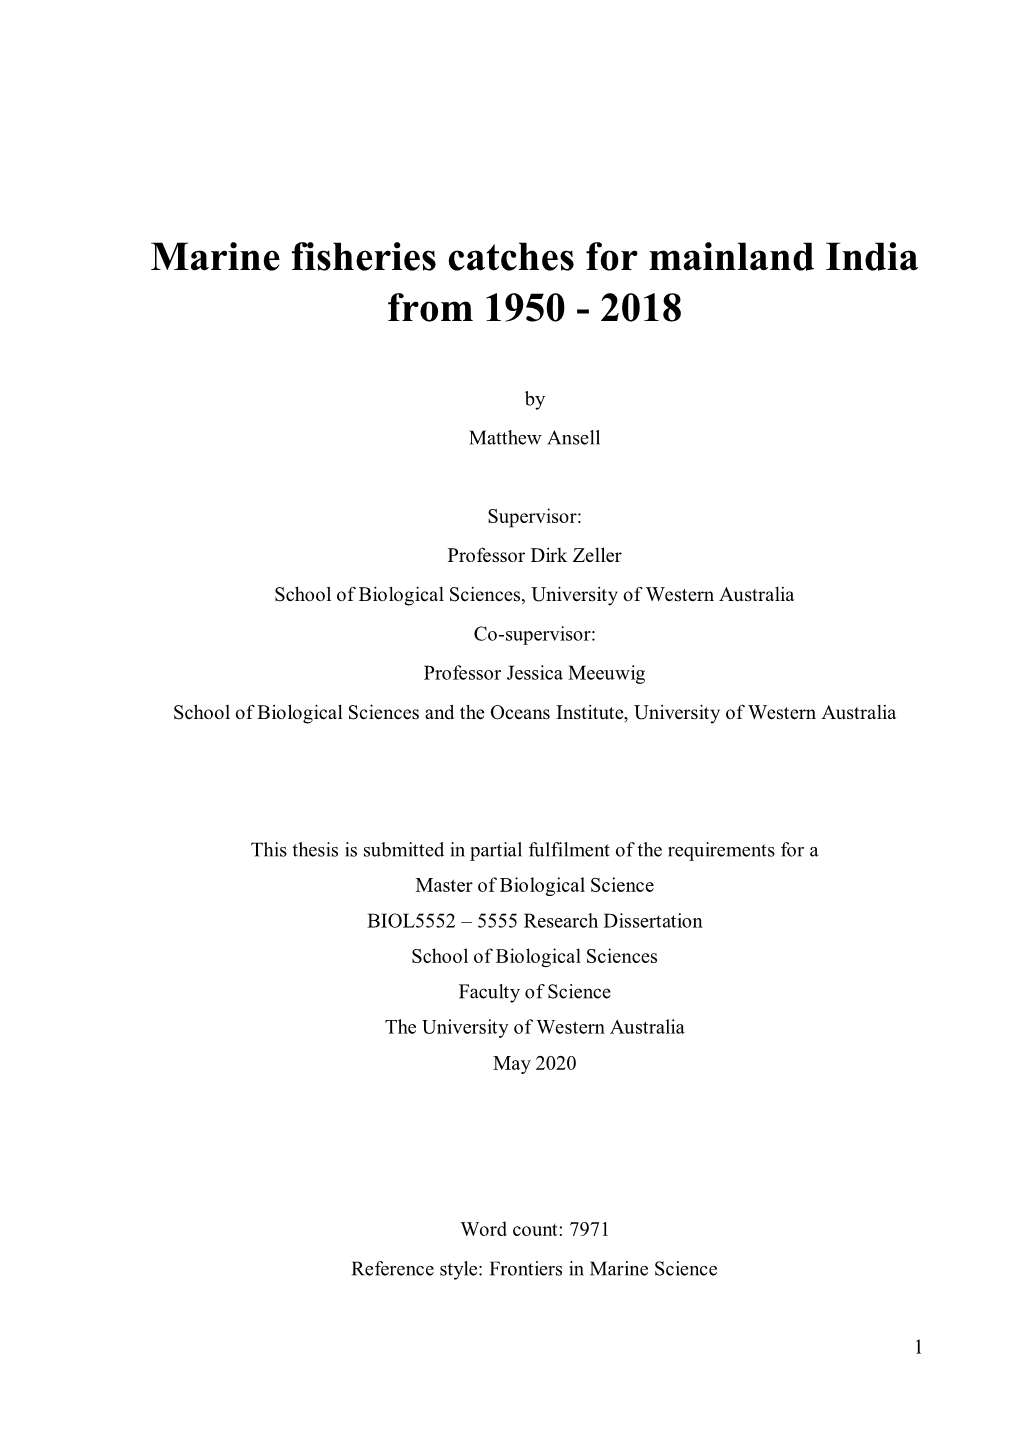 Marine Fisheries Catches for Mainland India from 1950 - 2018